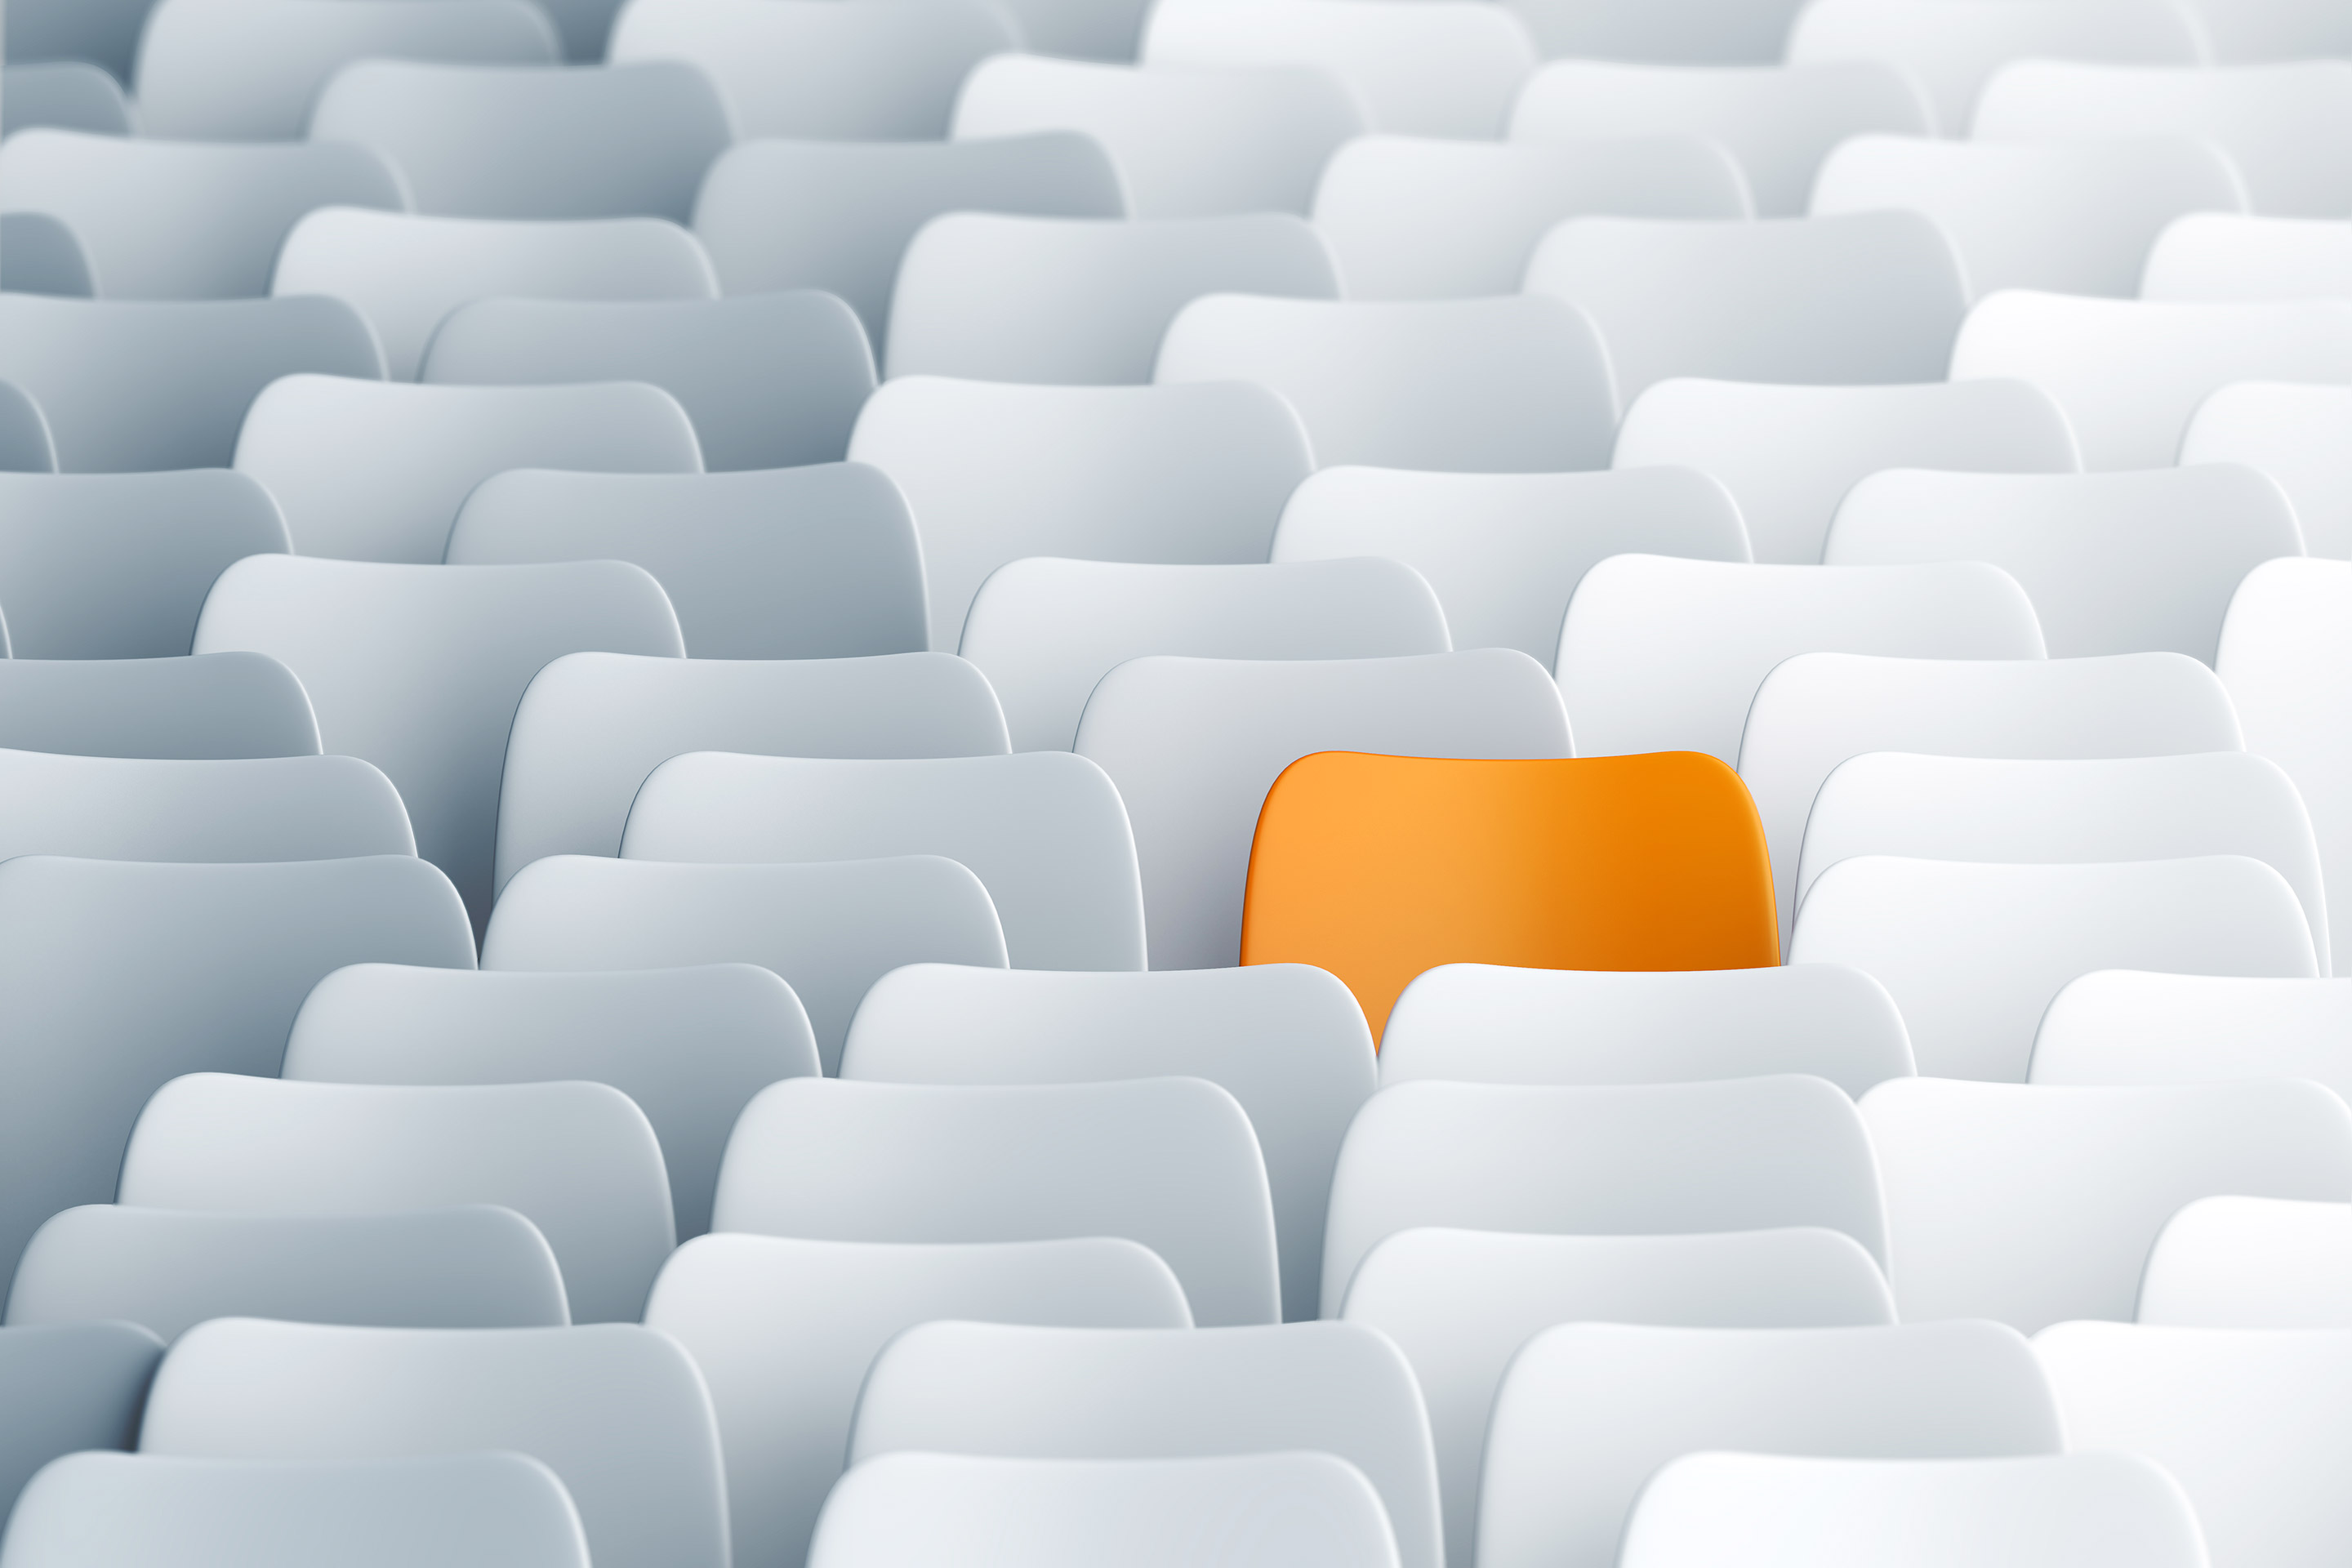 A single orange chair in a group of stark white chairs is certainly unpredictable.